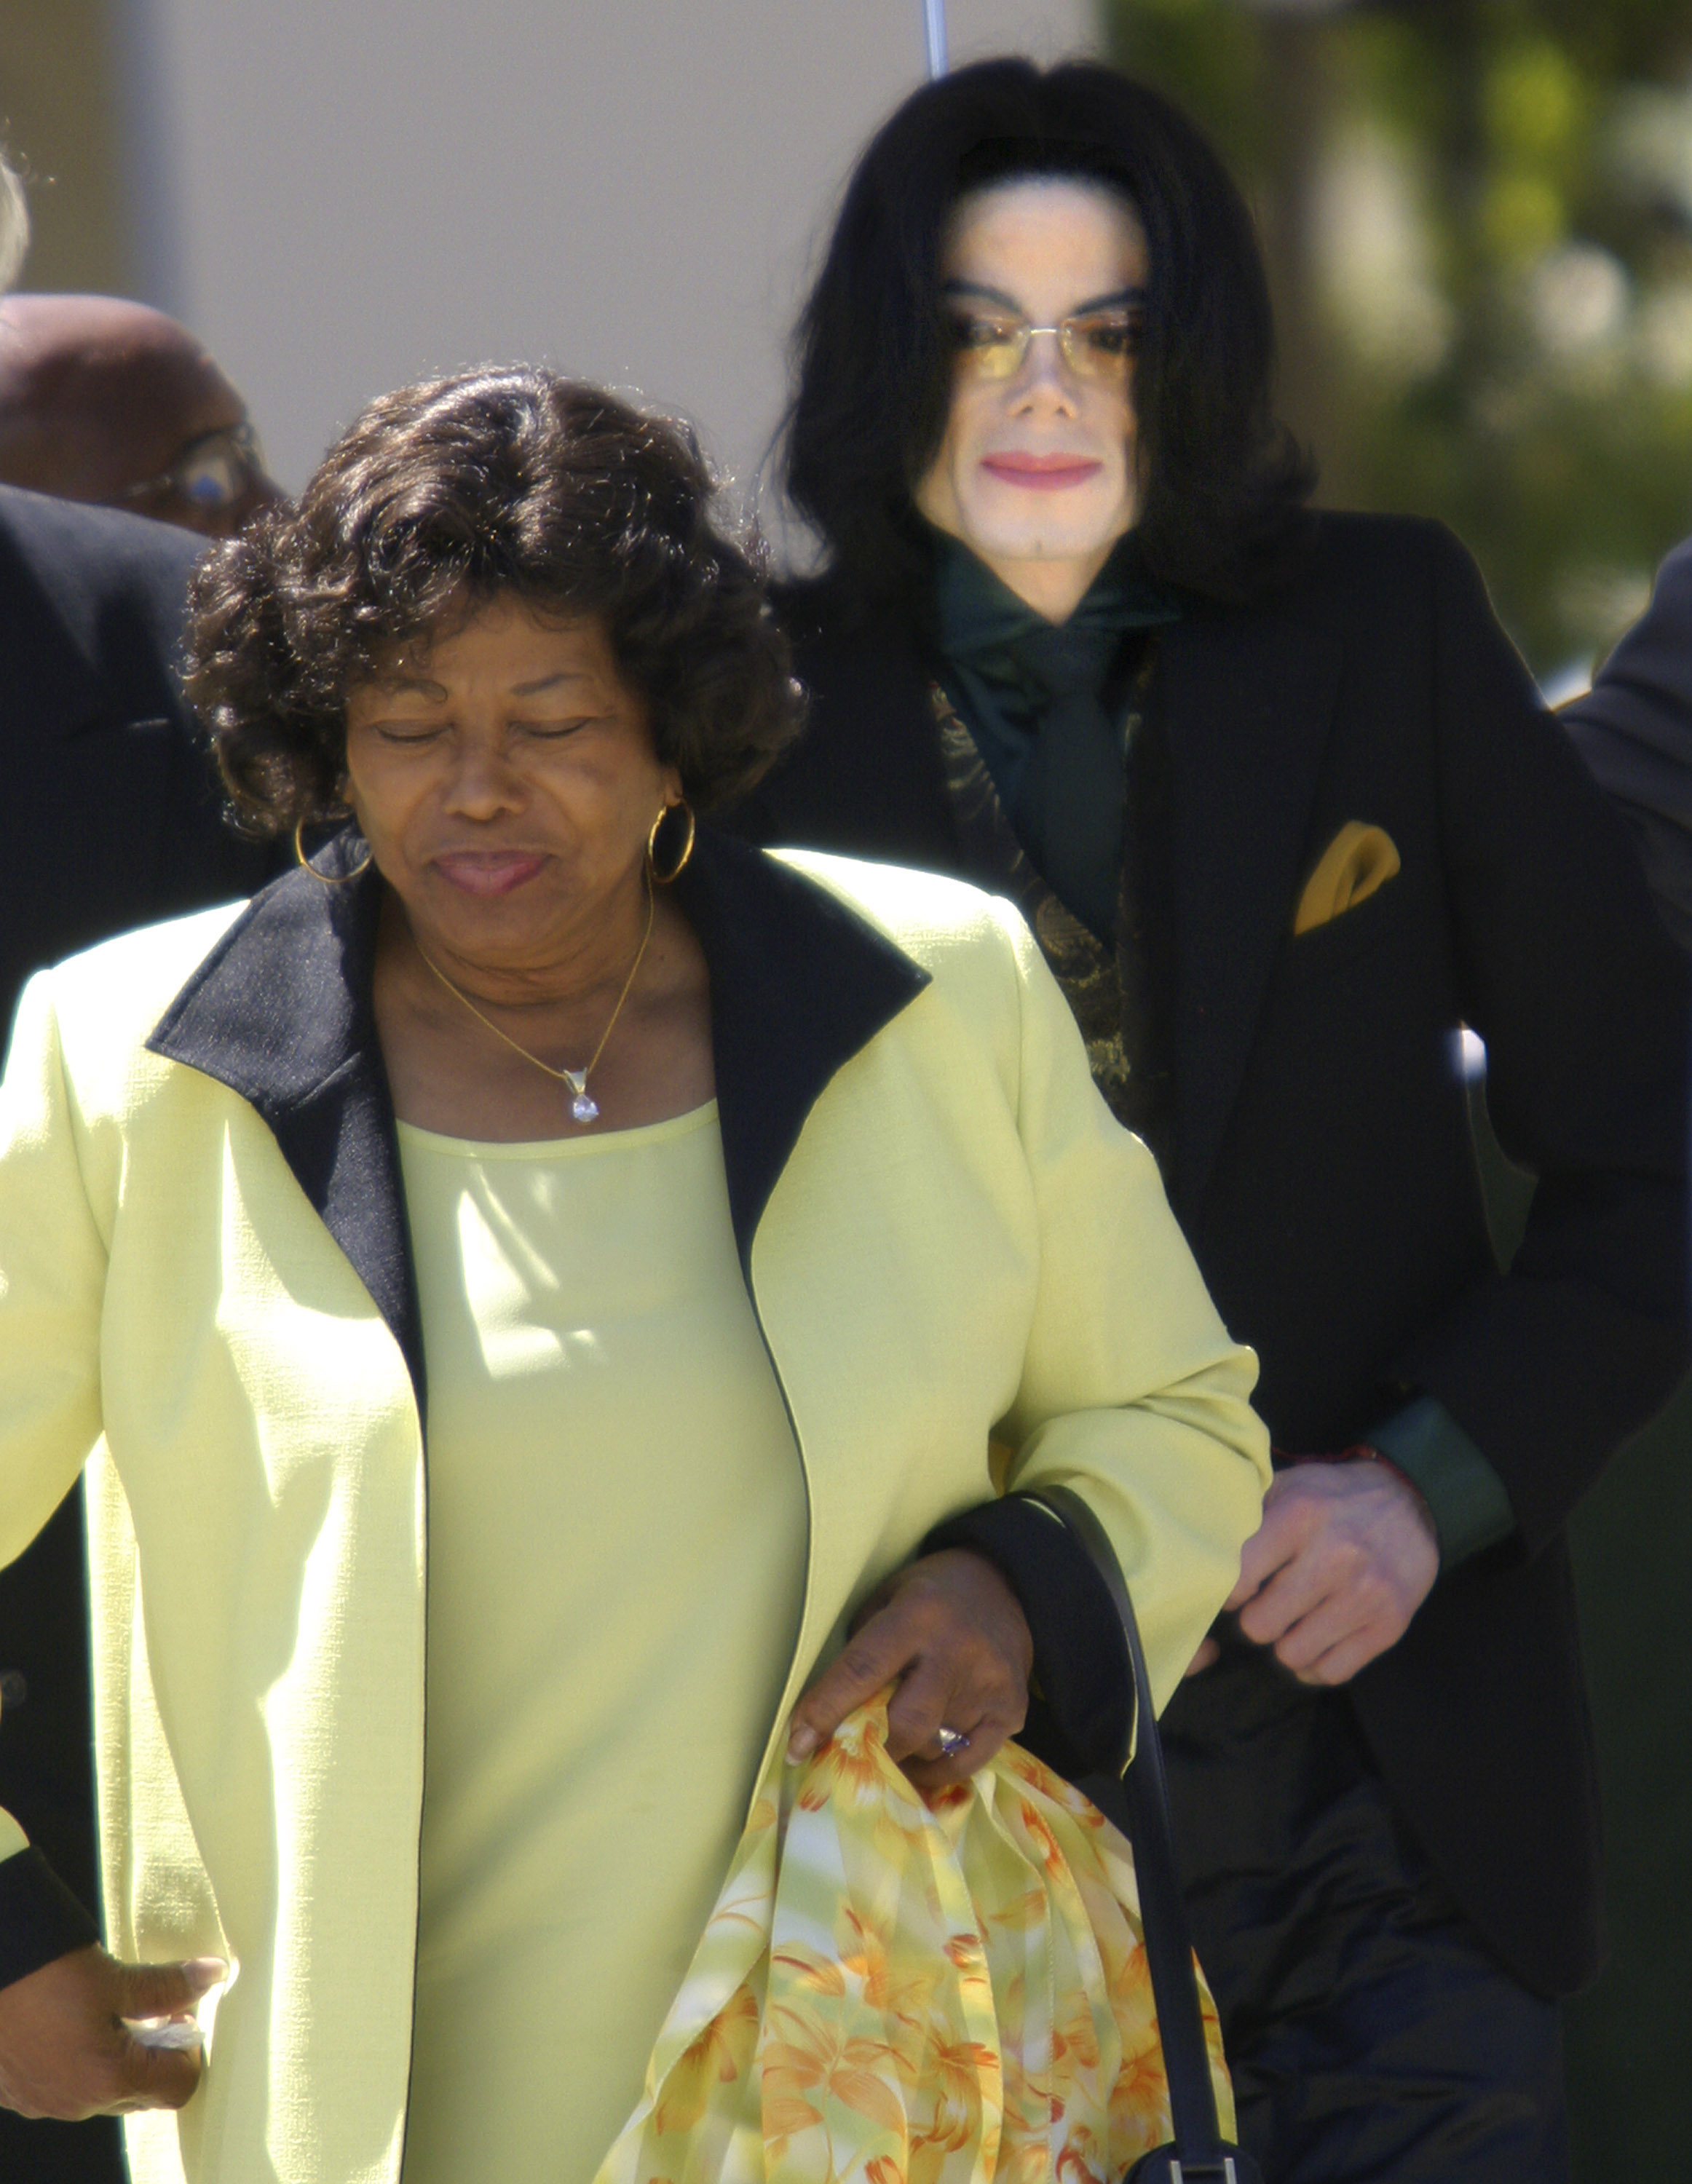 Michael Jackson and his mother Katherine Jackson in Santa Maria, California on April 18, 2005 | Source: Getty Images